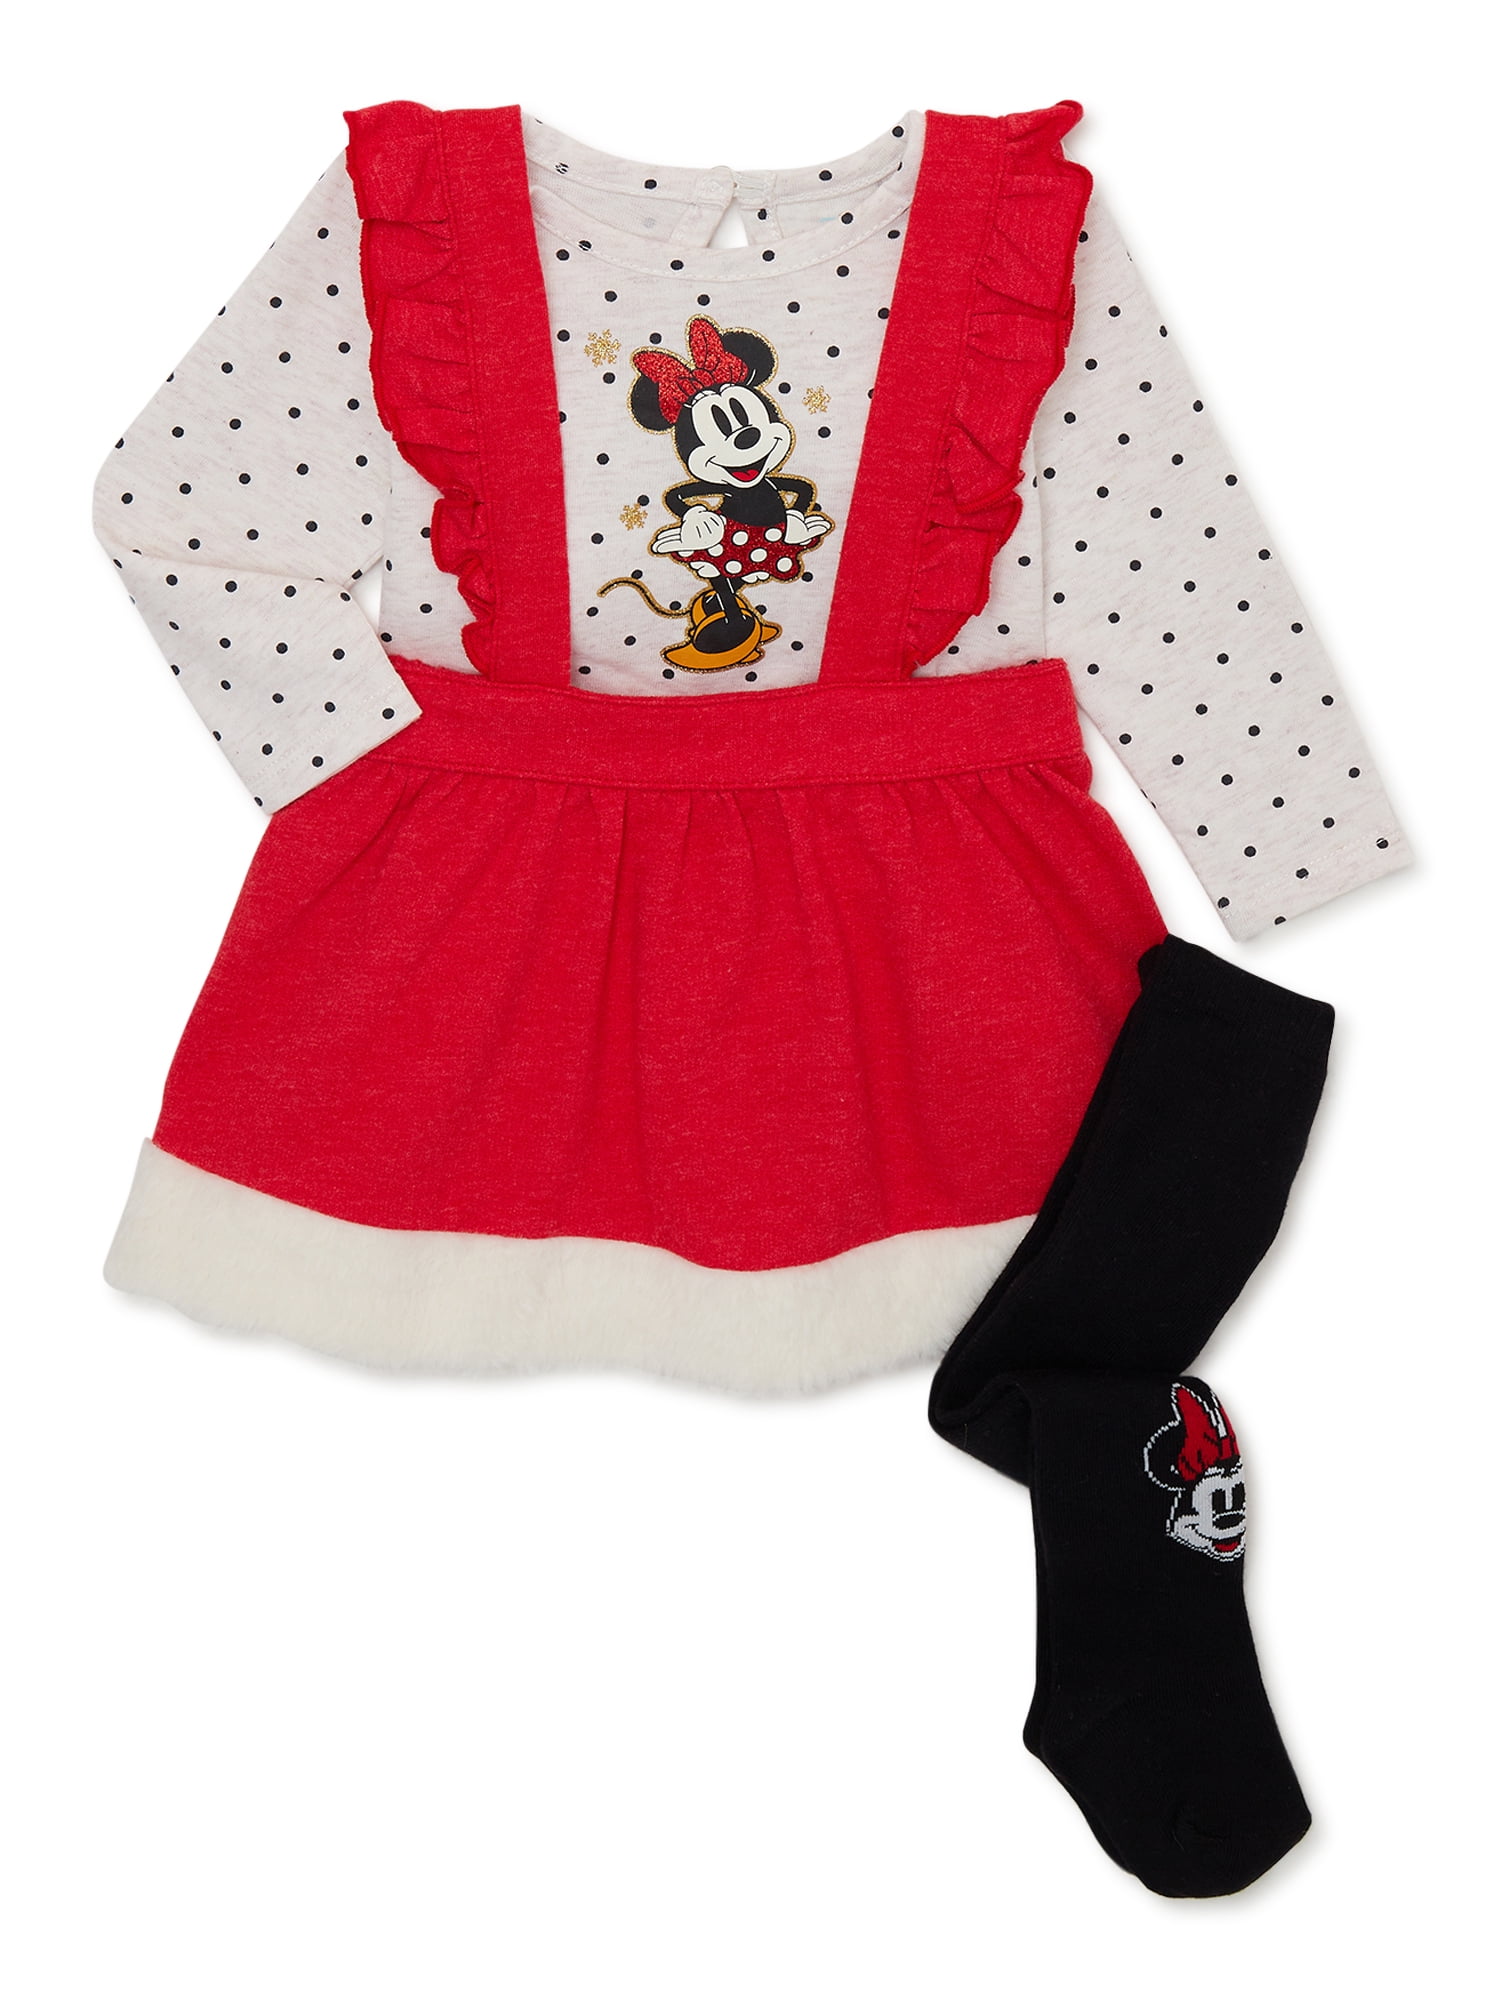 Disney Minnie Mouse Baby Girl Top, Pinafore and Tights Outfit Set, 3-Piece, Sizes 0/3-24 Months